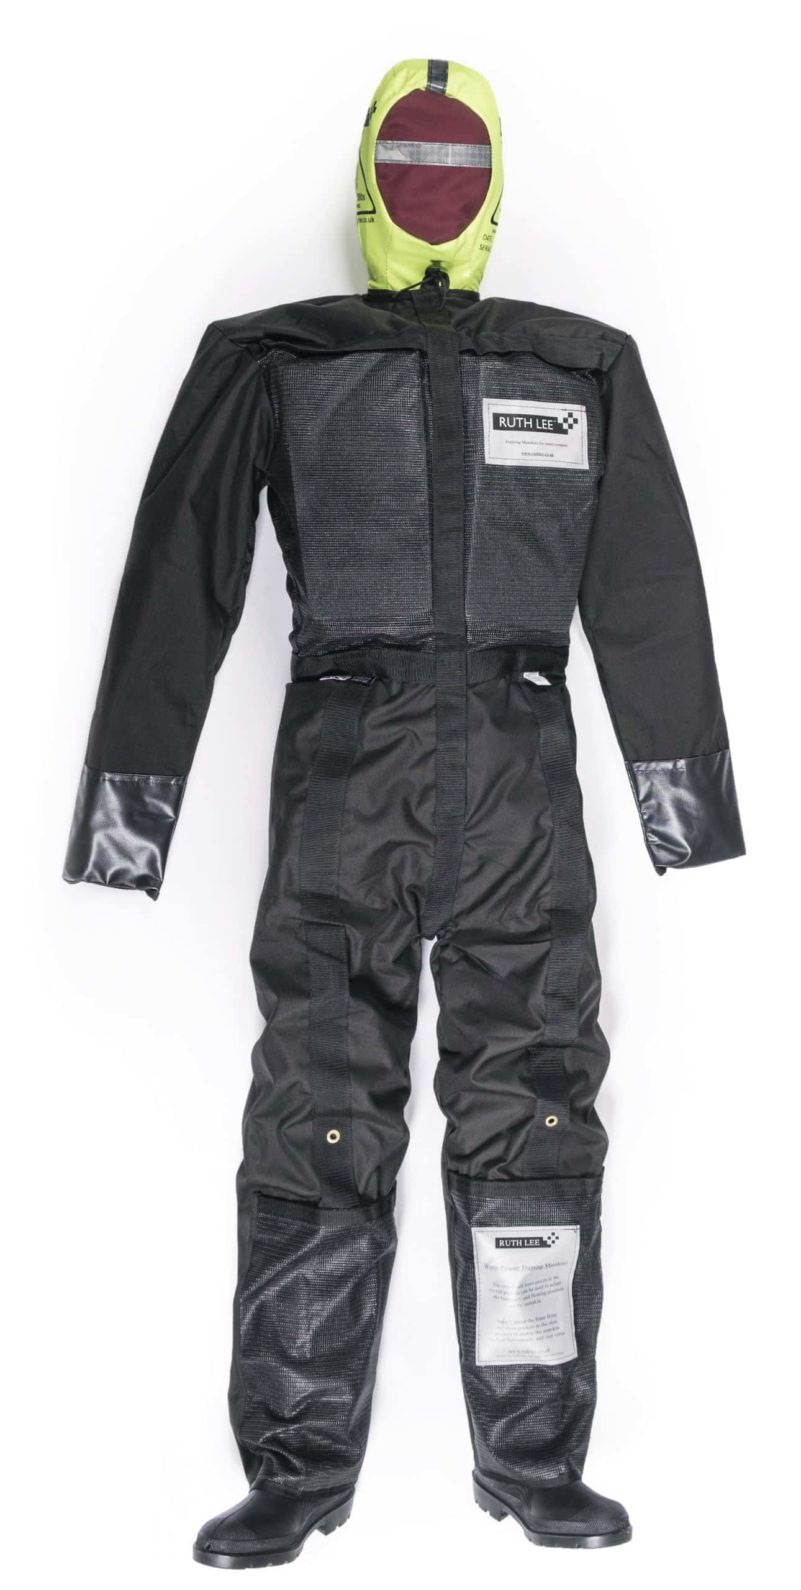 Replacement Overalls - Water Rescue Manikins